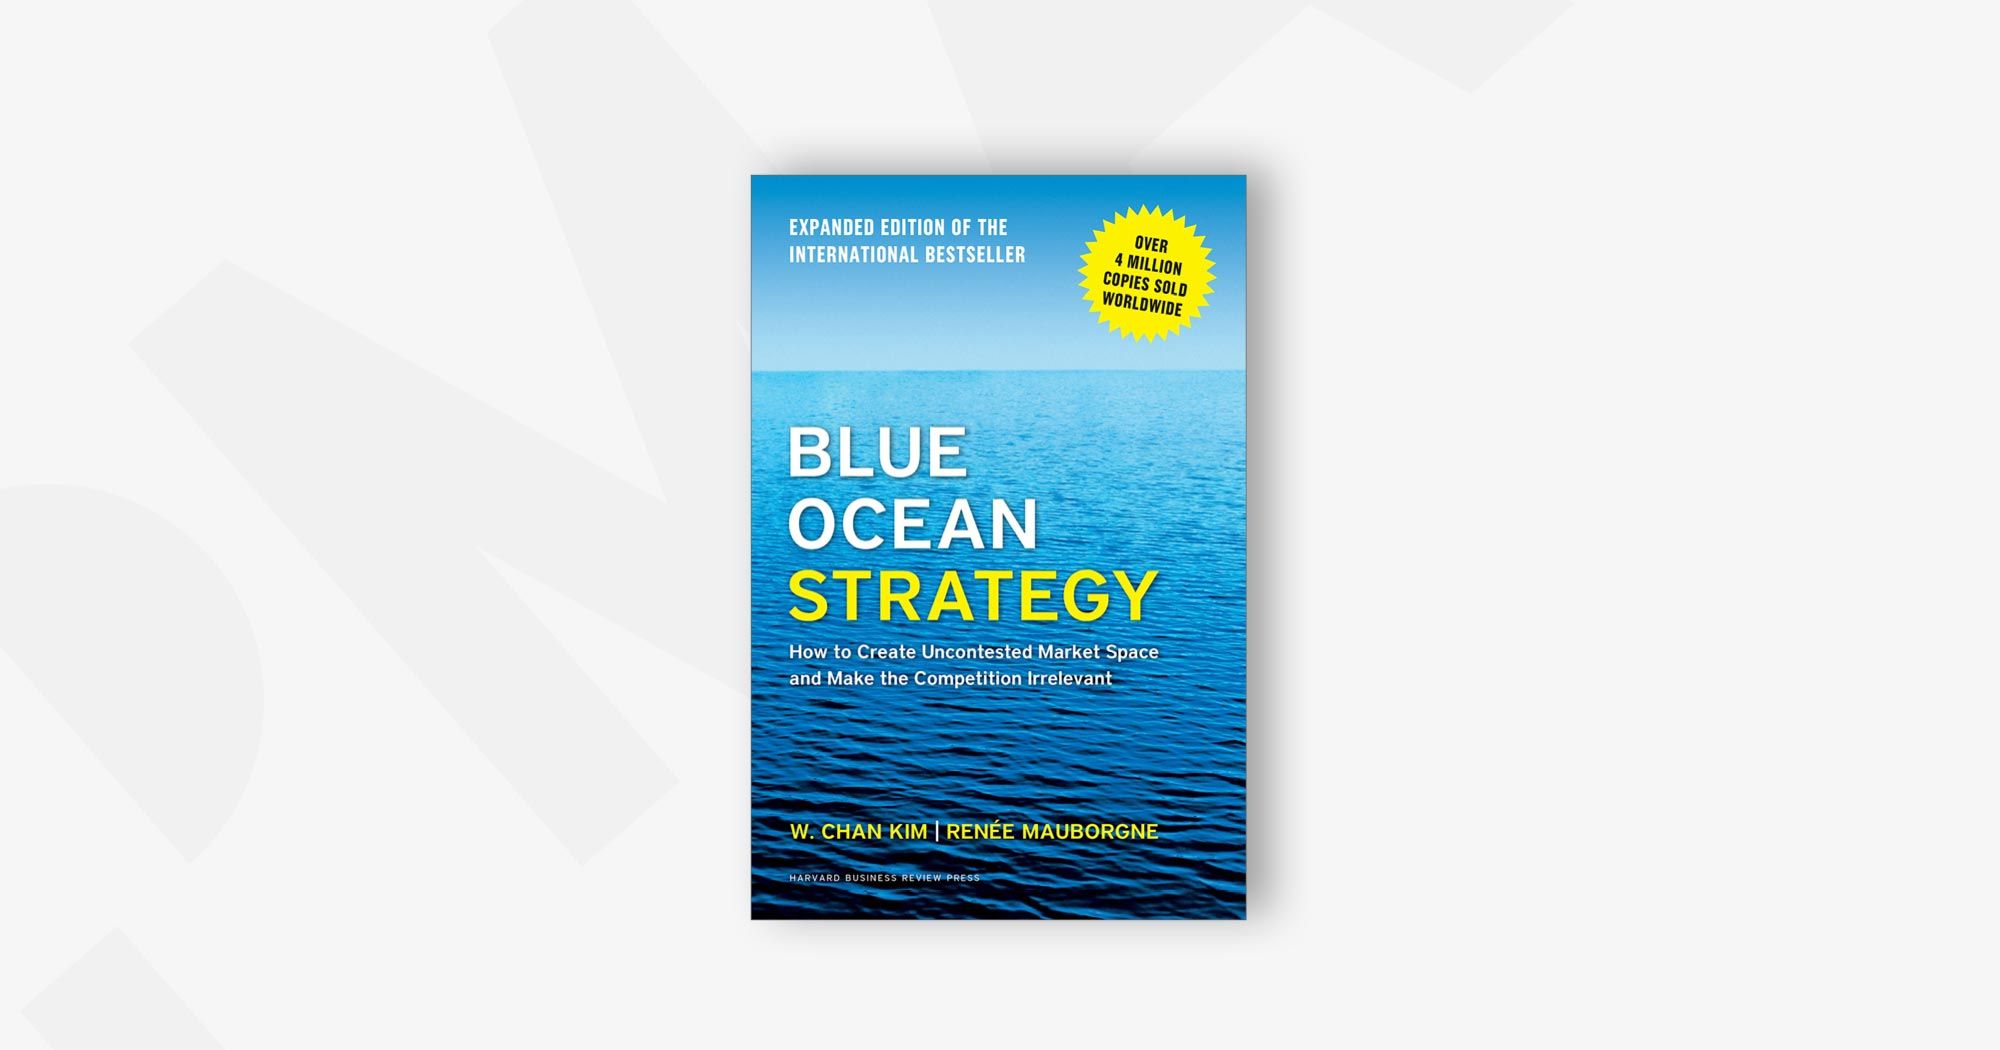 Blue Ocean Strategy: How to Create Uncontested Market Space and Make the Competition Irrelevant – Renée Mauborgne and W. Chan Kim